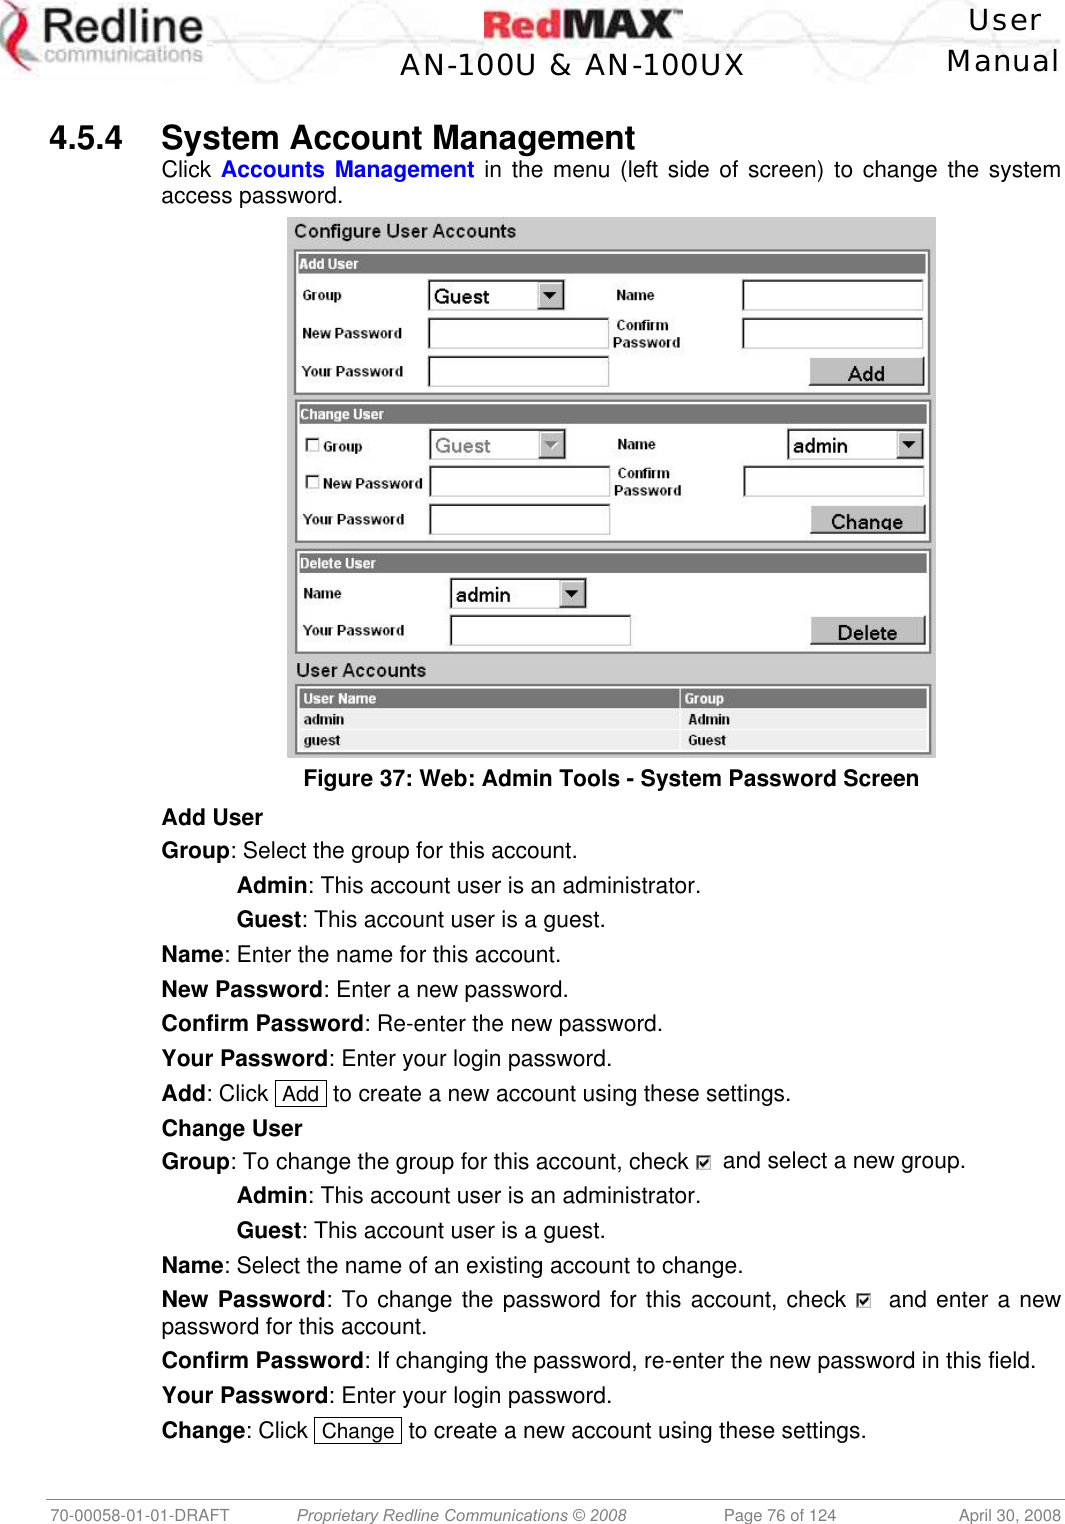    User  AN-100U &amp; AN-100UX Manual   70-00058-01-01-DRAFT  Proprietary Redline Communications © 2008   Page 76 of 124  April 30, 2008  4.5.4 System Account Management Click Accounts Management in the menu (left side of screen) to change the system access password.  Figure 37: Web: Admin Tools - System Password Screen Add User Group: Select the group for this account.  Admin: This account user is an administrator.  Guest: This account user is a guest. Name: Enter the name for this account. New Password: Enter a new password. Confirm Password: Re-enter the new password. Your Password: Enter your login password. Add: Click  Add  to create a new account using these settings. Change User Group: To change the group for this account, check    and select a new group.  Admin: This account user is an administrator.  Guest: This account user is a guest. Name: Select the name of an existing account to change. New Password: To change the password for this account, check    and enter a new password for this account. Confirm Password: If changing the password, re-enter the new password in this field. Your Password: Enter your login password. Change: Click  Change  to create a new account using these settings. 